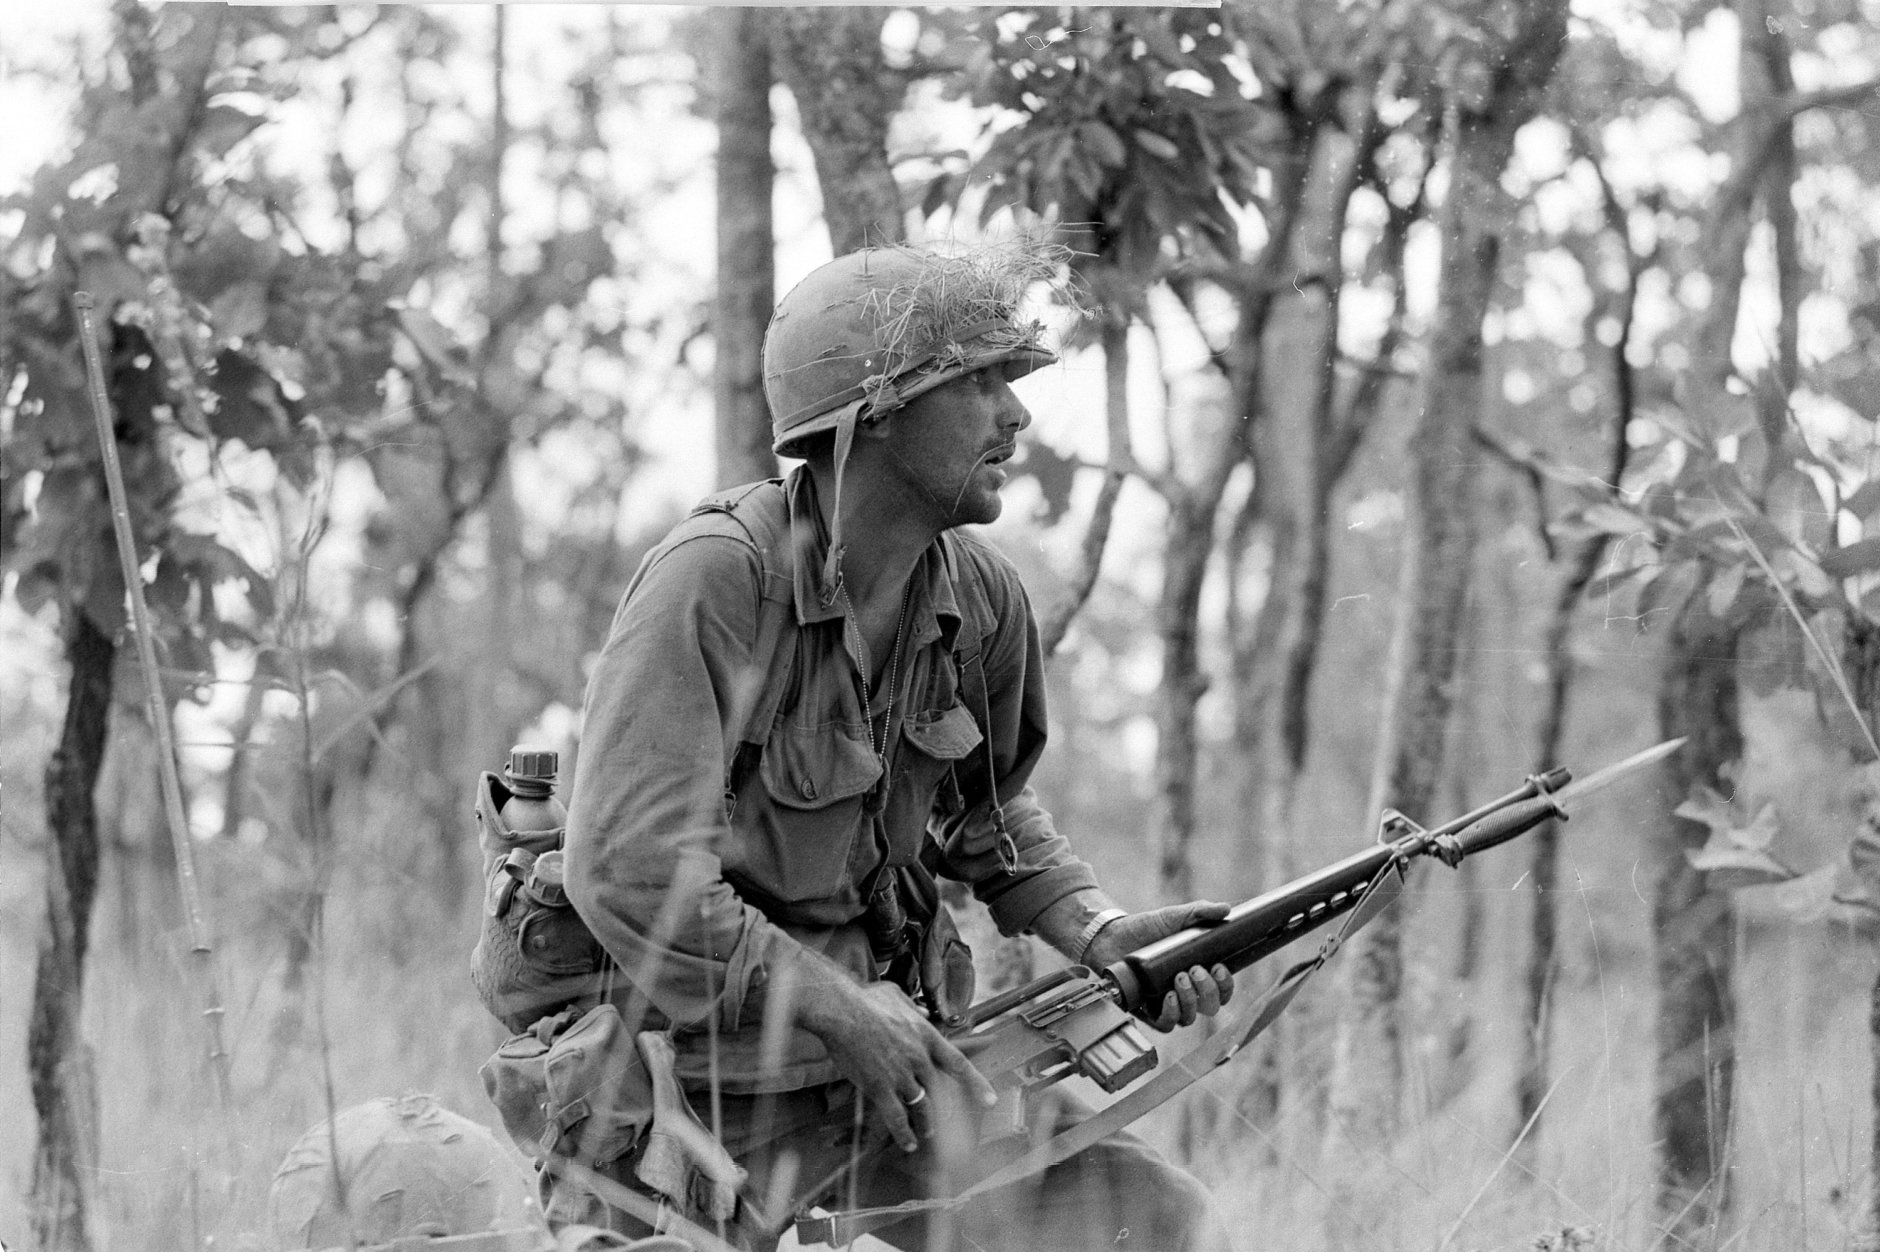 2nd Lt. R. C. &quot;Rick&quot; Rescorla moves carefully with fixed bayonet through the underbrush in an attack of North Vietnamese sniper pockets outside the American perimeter in the Ia Drang Valley on Nov. 16, 1965 during the Vietnam War.  The soldier is a member of one of the hardest hit companies of the 1st Cavalry Division units.  (AP Photo/Peter Arnett)